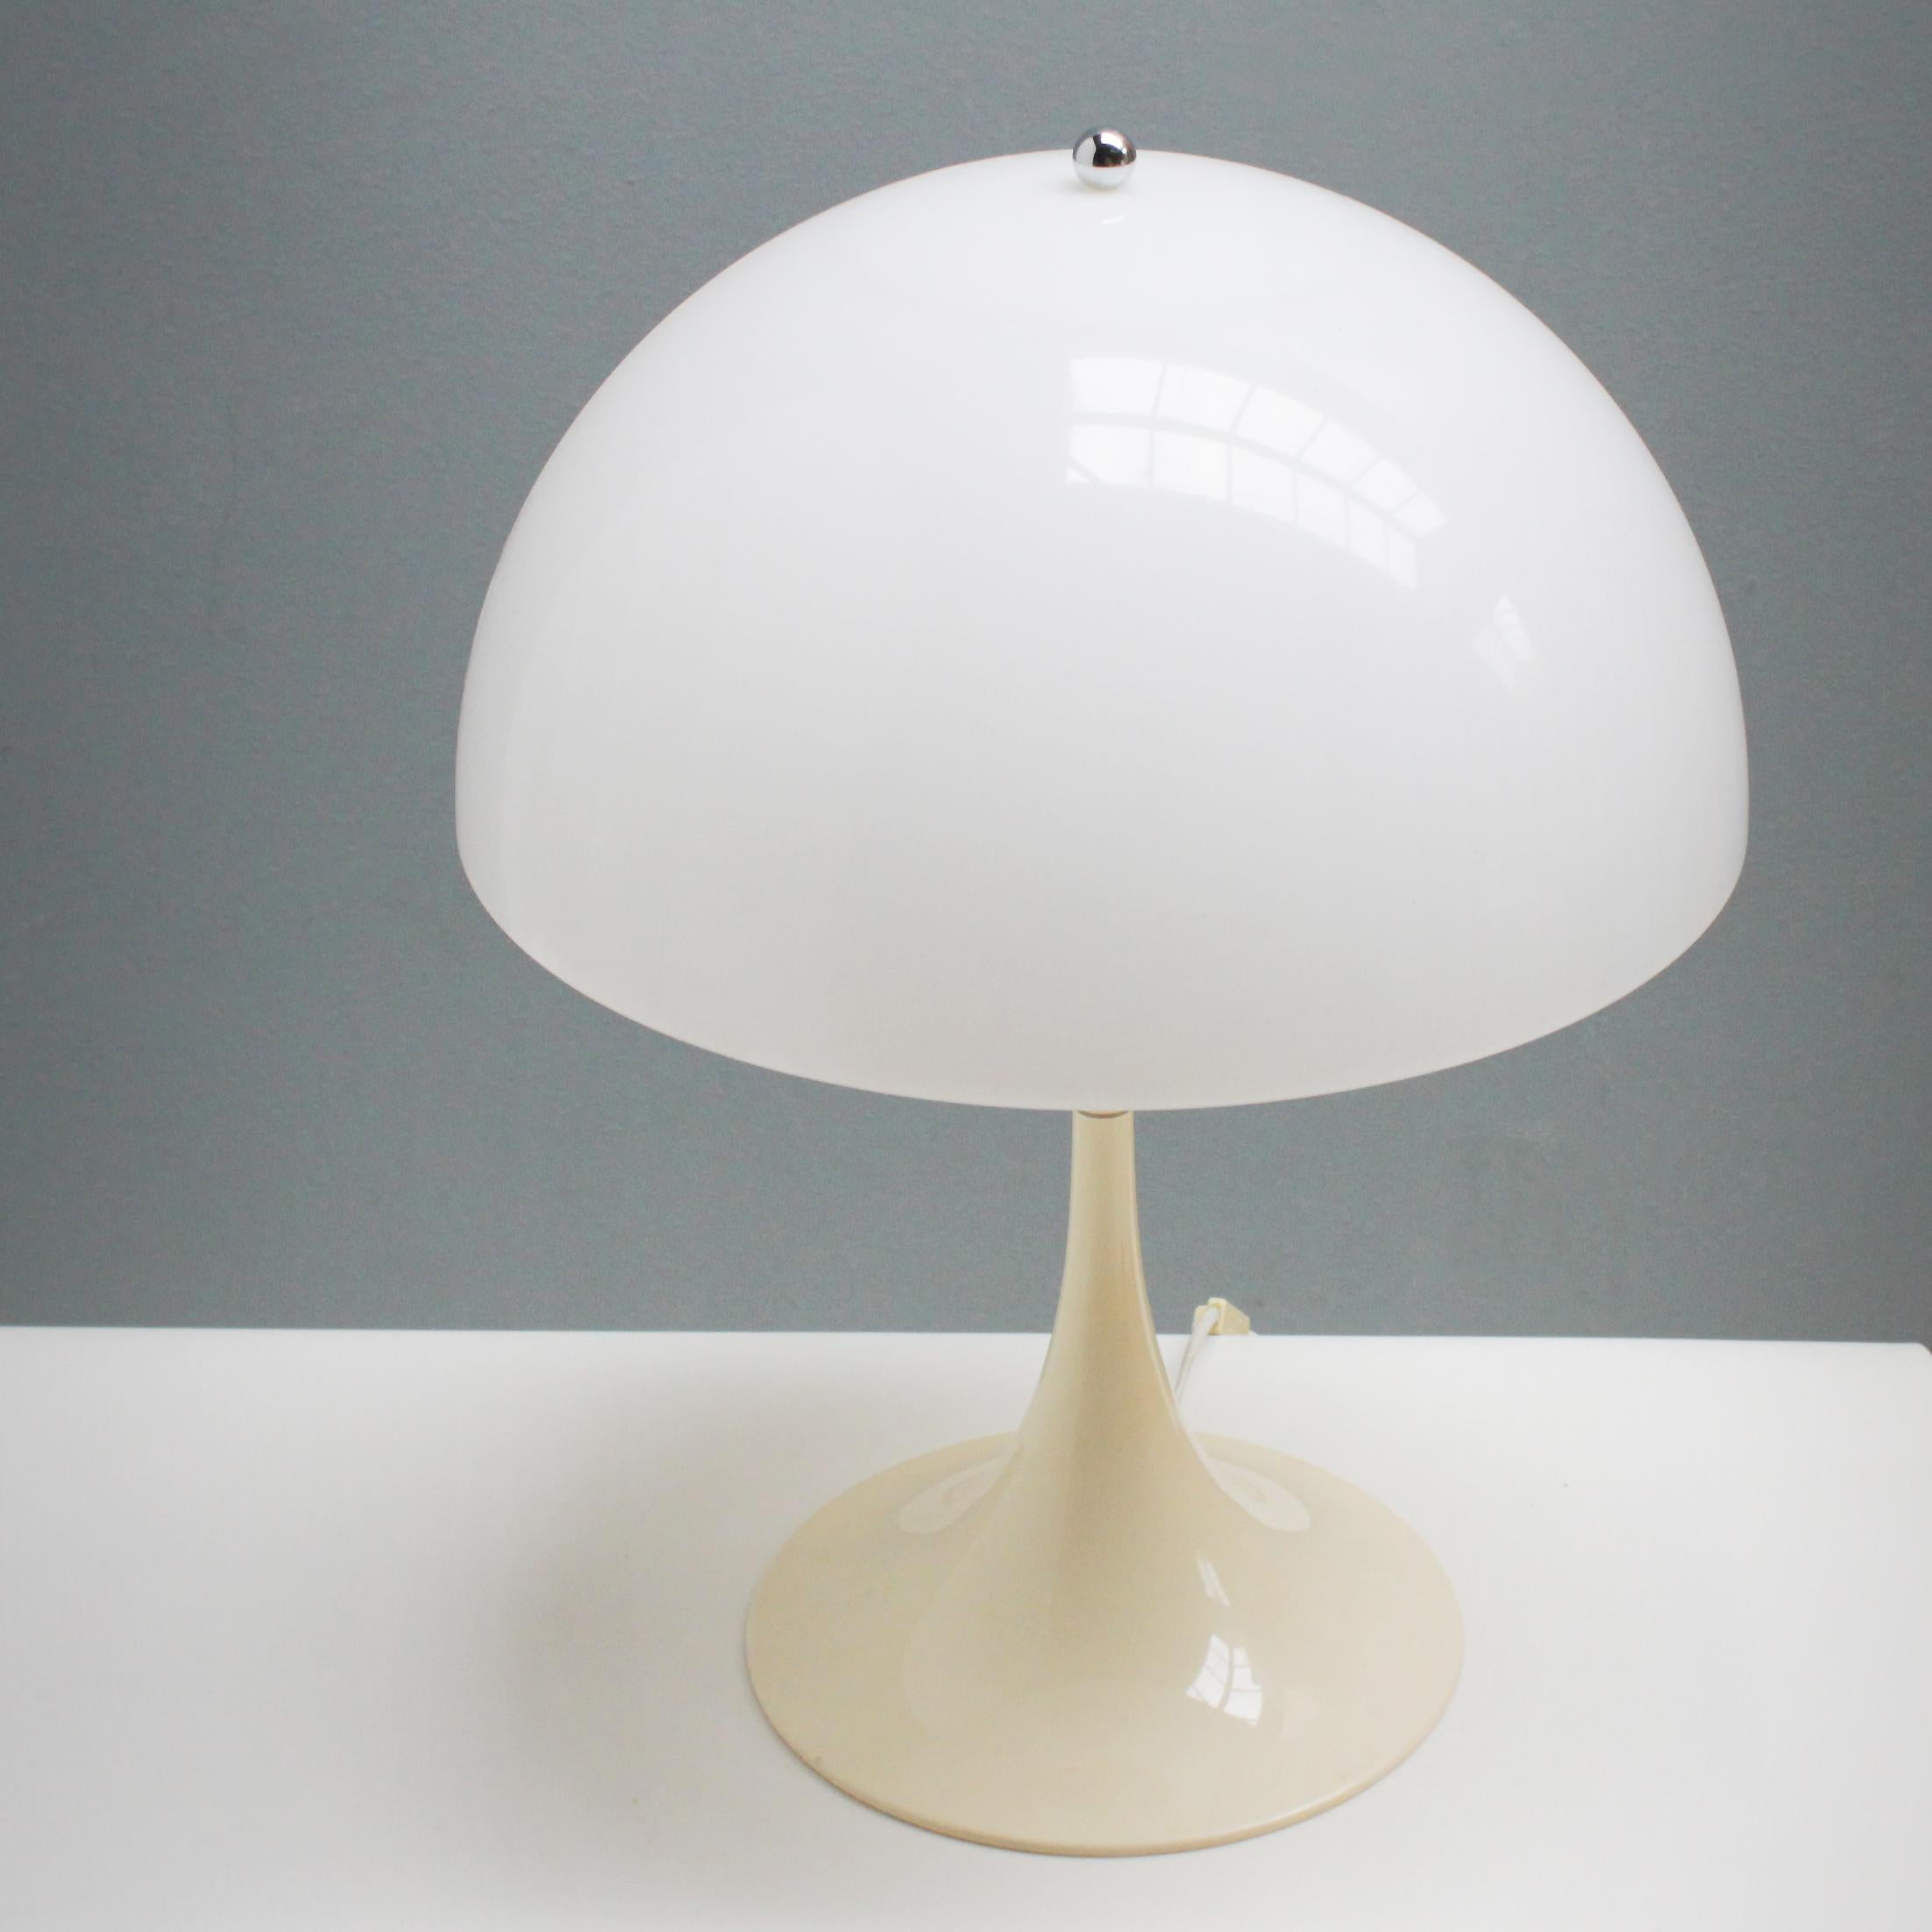 An original 'Panthella' table lamp, design by Verner Panton for Louis Poulsen, Denmark, 1971. Beautiful condition. Lamp on an elegant, curved foot, with a slender shaft that widens out again at shade height. Topped by large hemispherical